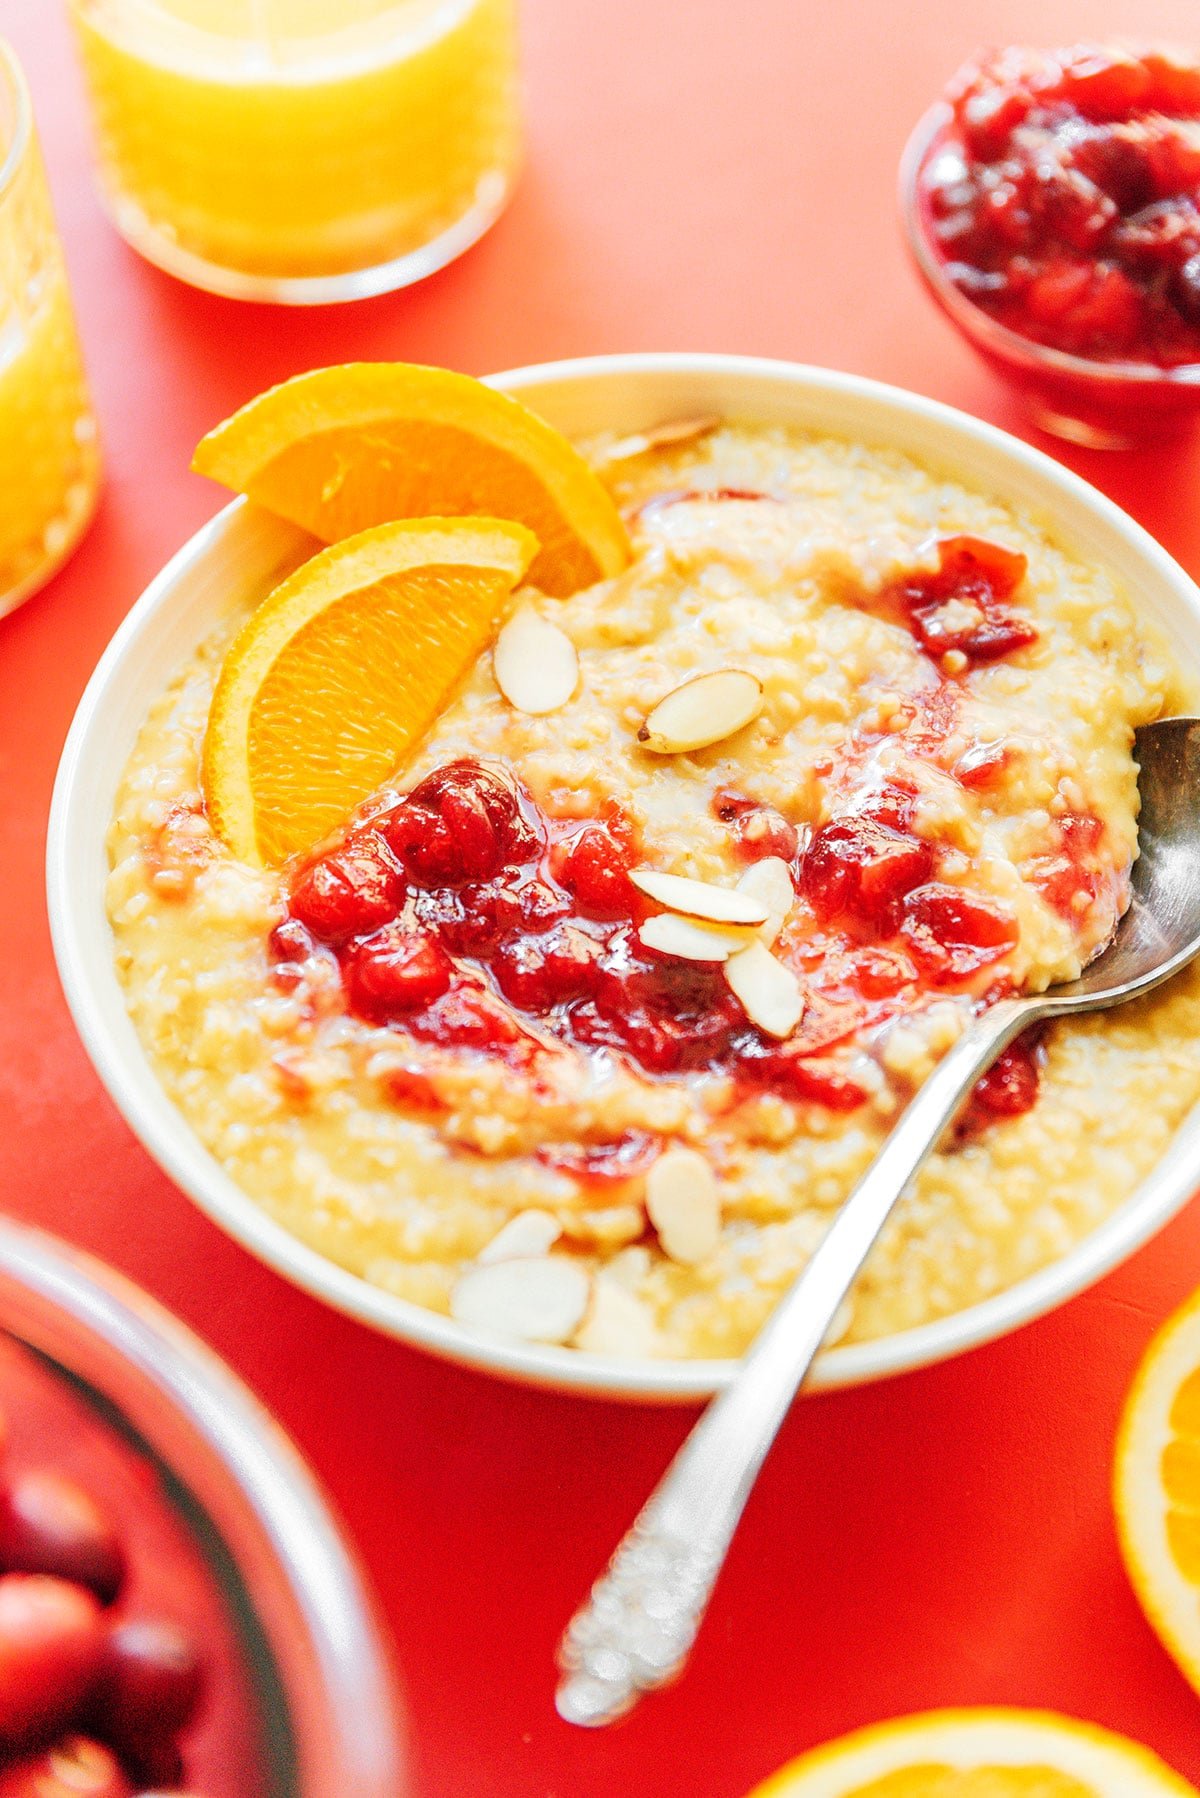 A close up view detailing the texture of cranberry and orange oatmeal